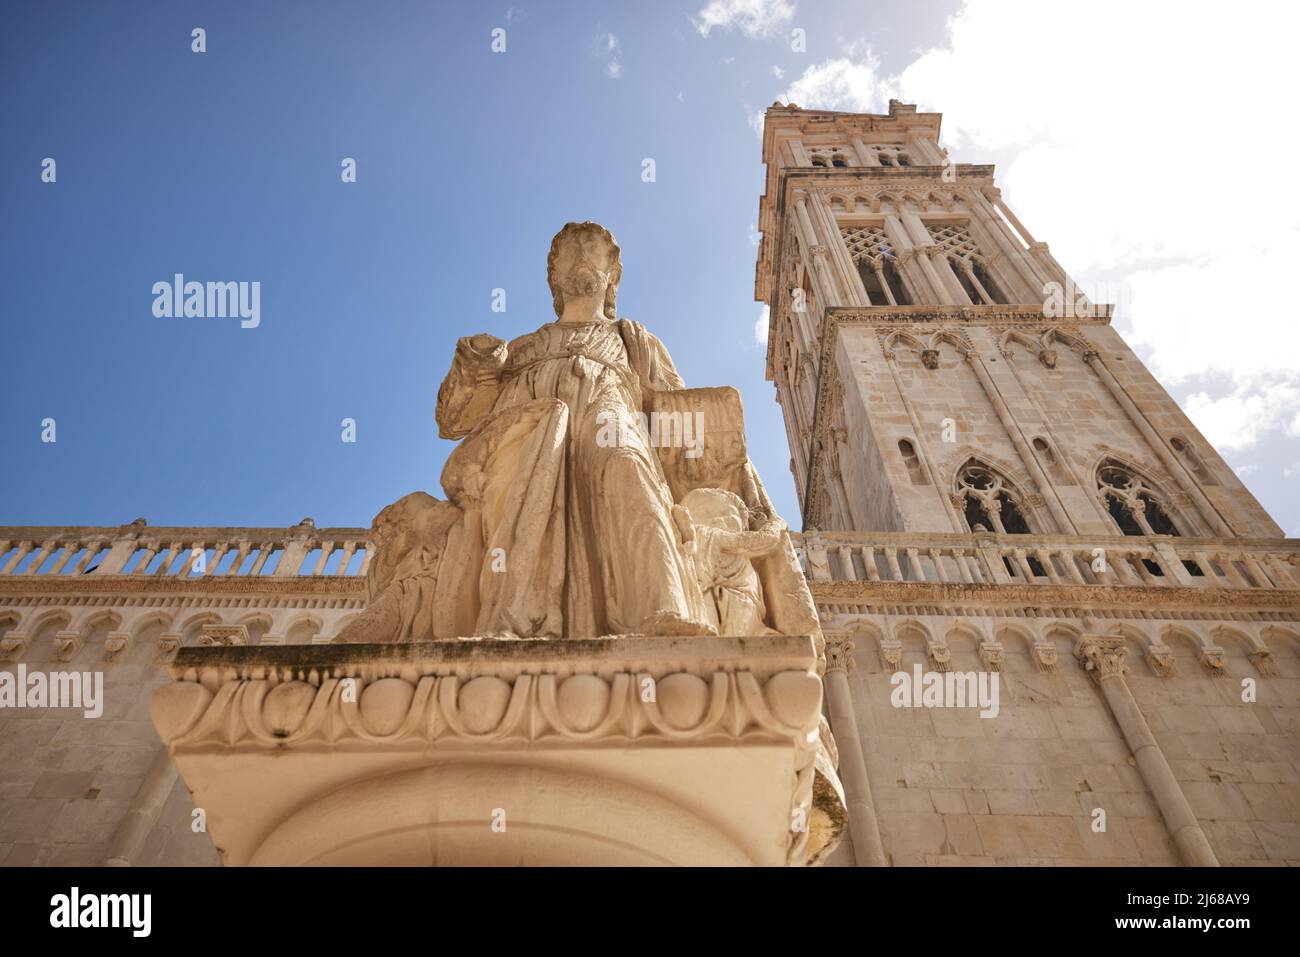 The city of Split in Croatia in the region of Dalmatia, Jesus Christ Statue in front of Cathedral of St. Lawrence Stock Photo